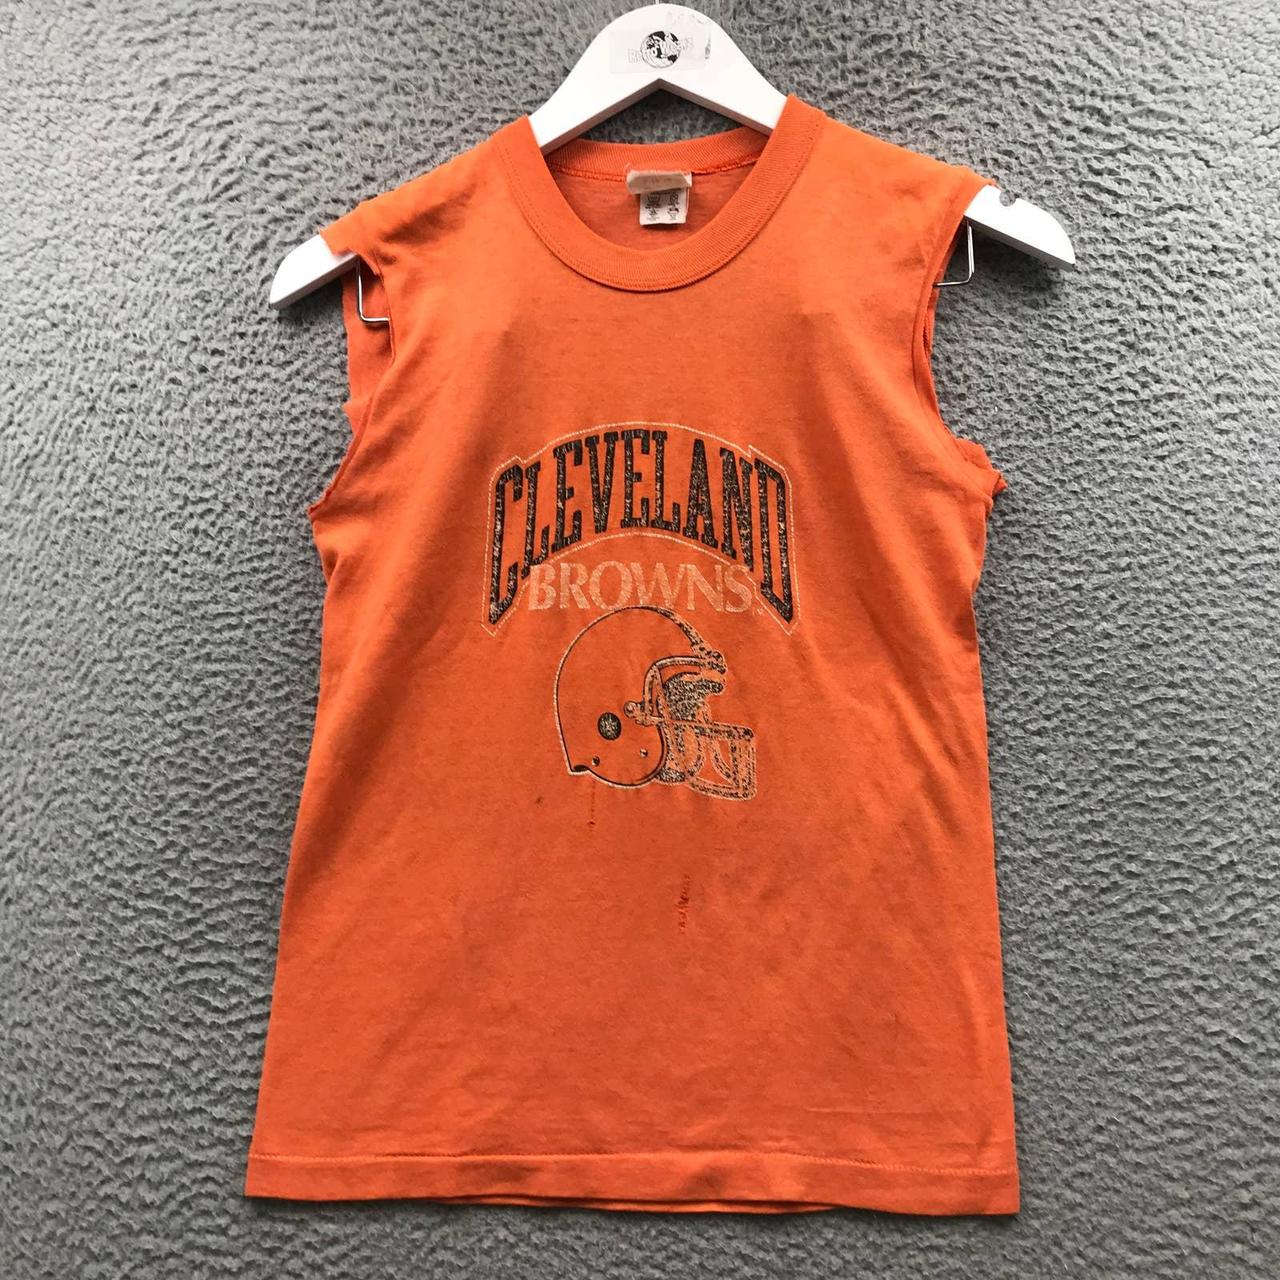 Vintage 80s Champion Cleveland Browns Sleeveless